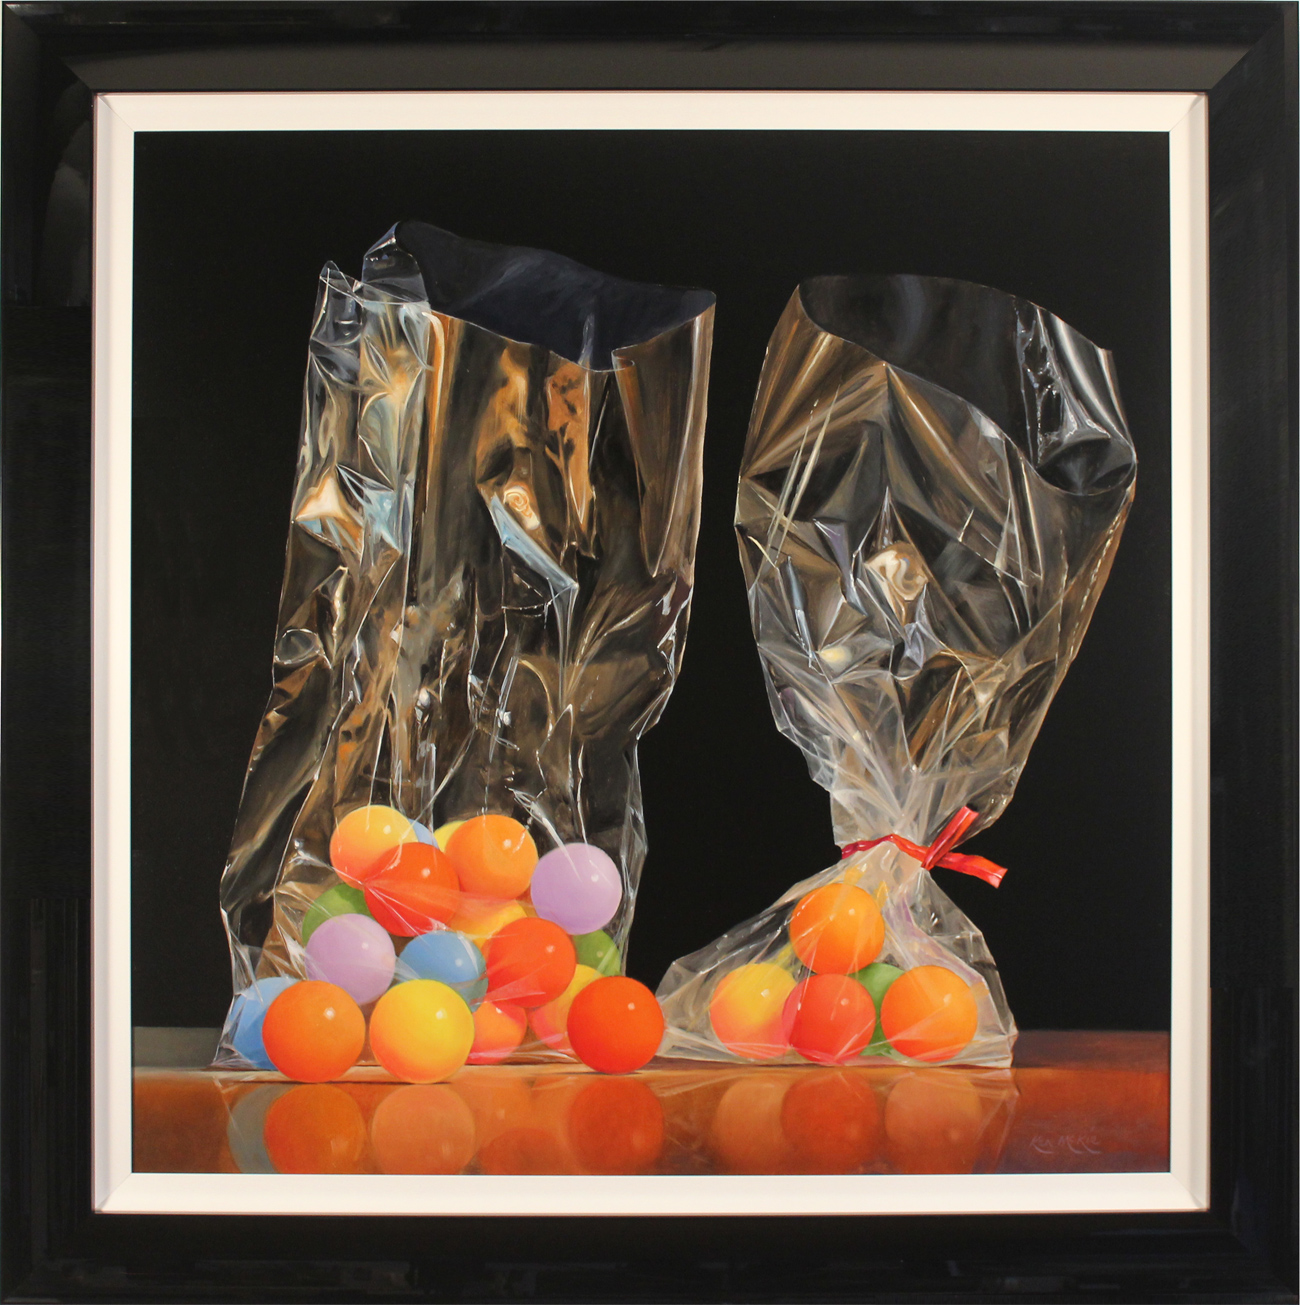 Ken Mckie, Original oil painting on canvas, Sweets. Click to enlarge